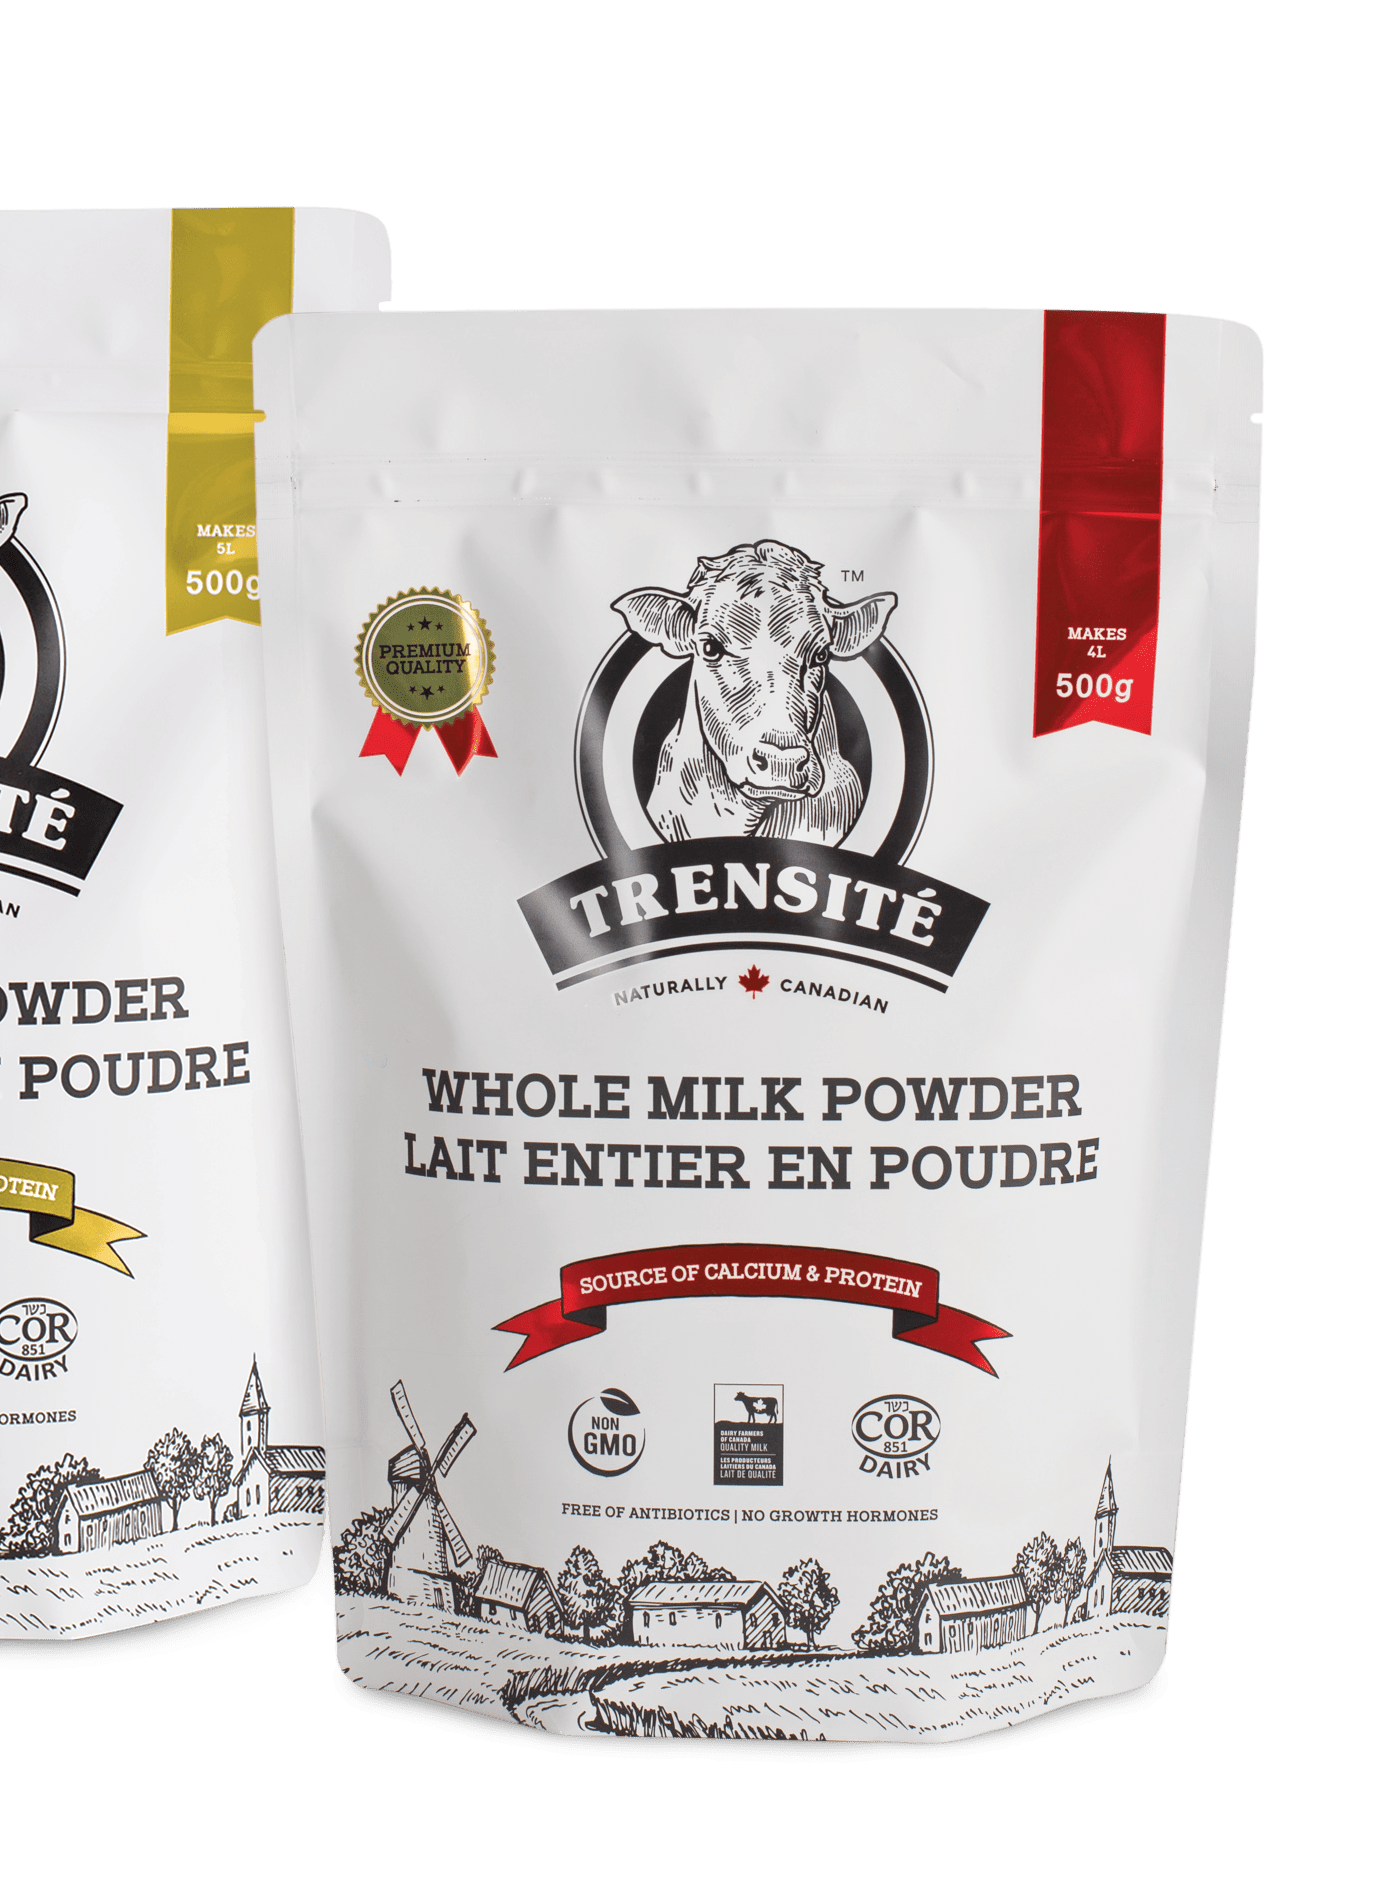 Trensite Dairy products